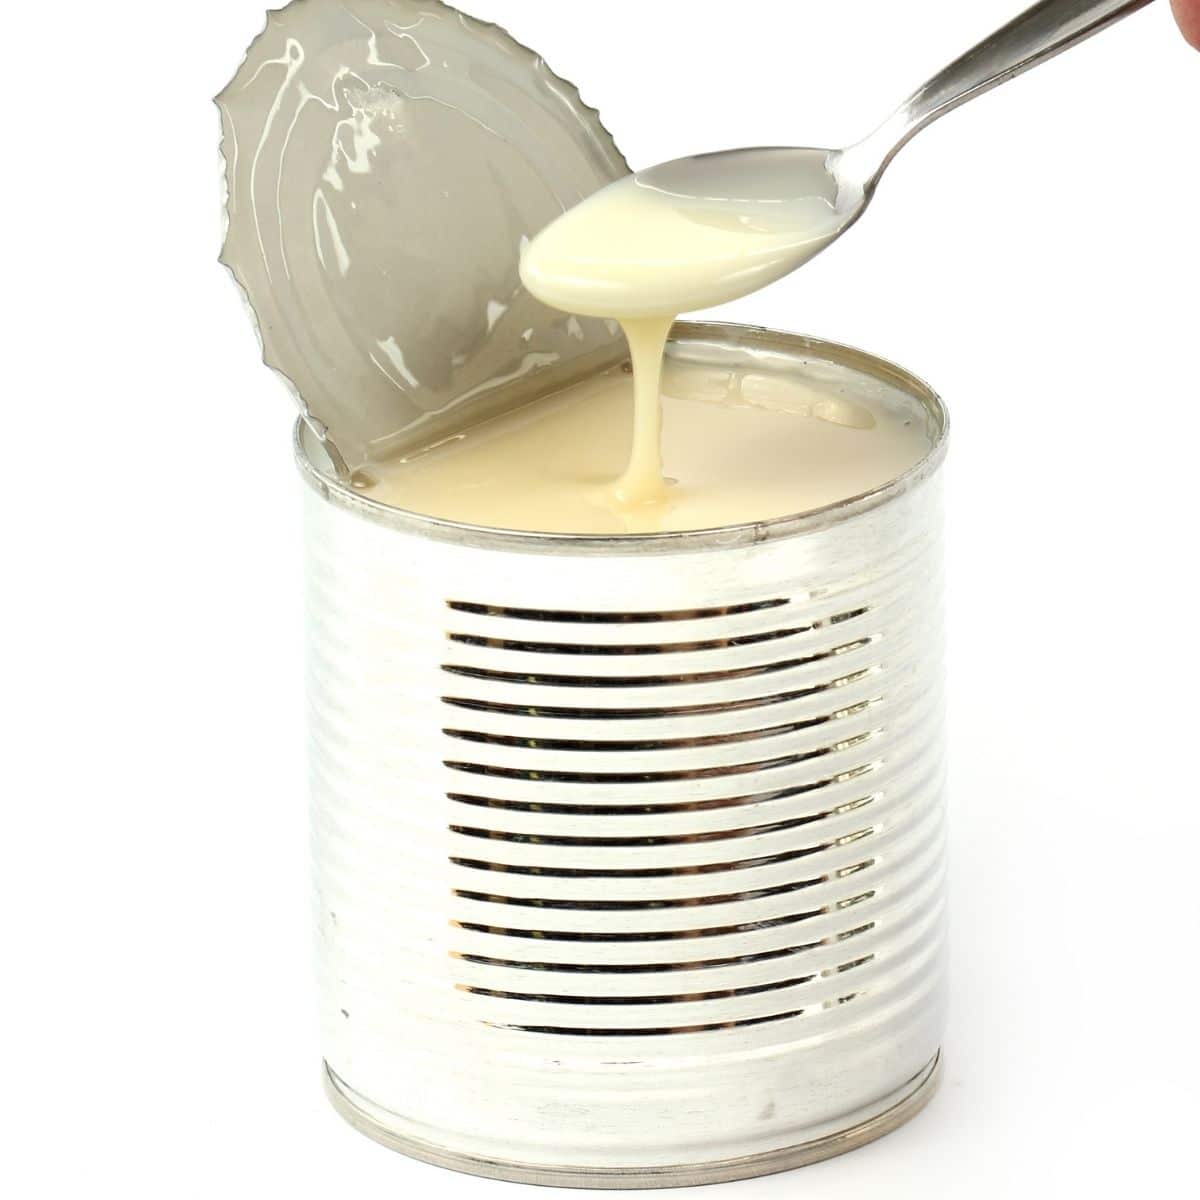 open can of sweetened condensed milk with spoon held above that appears to have just been dipped in the can